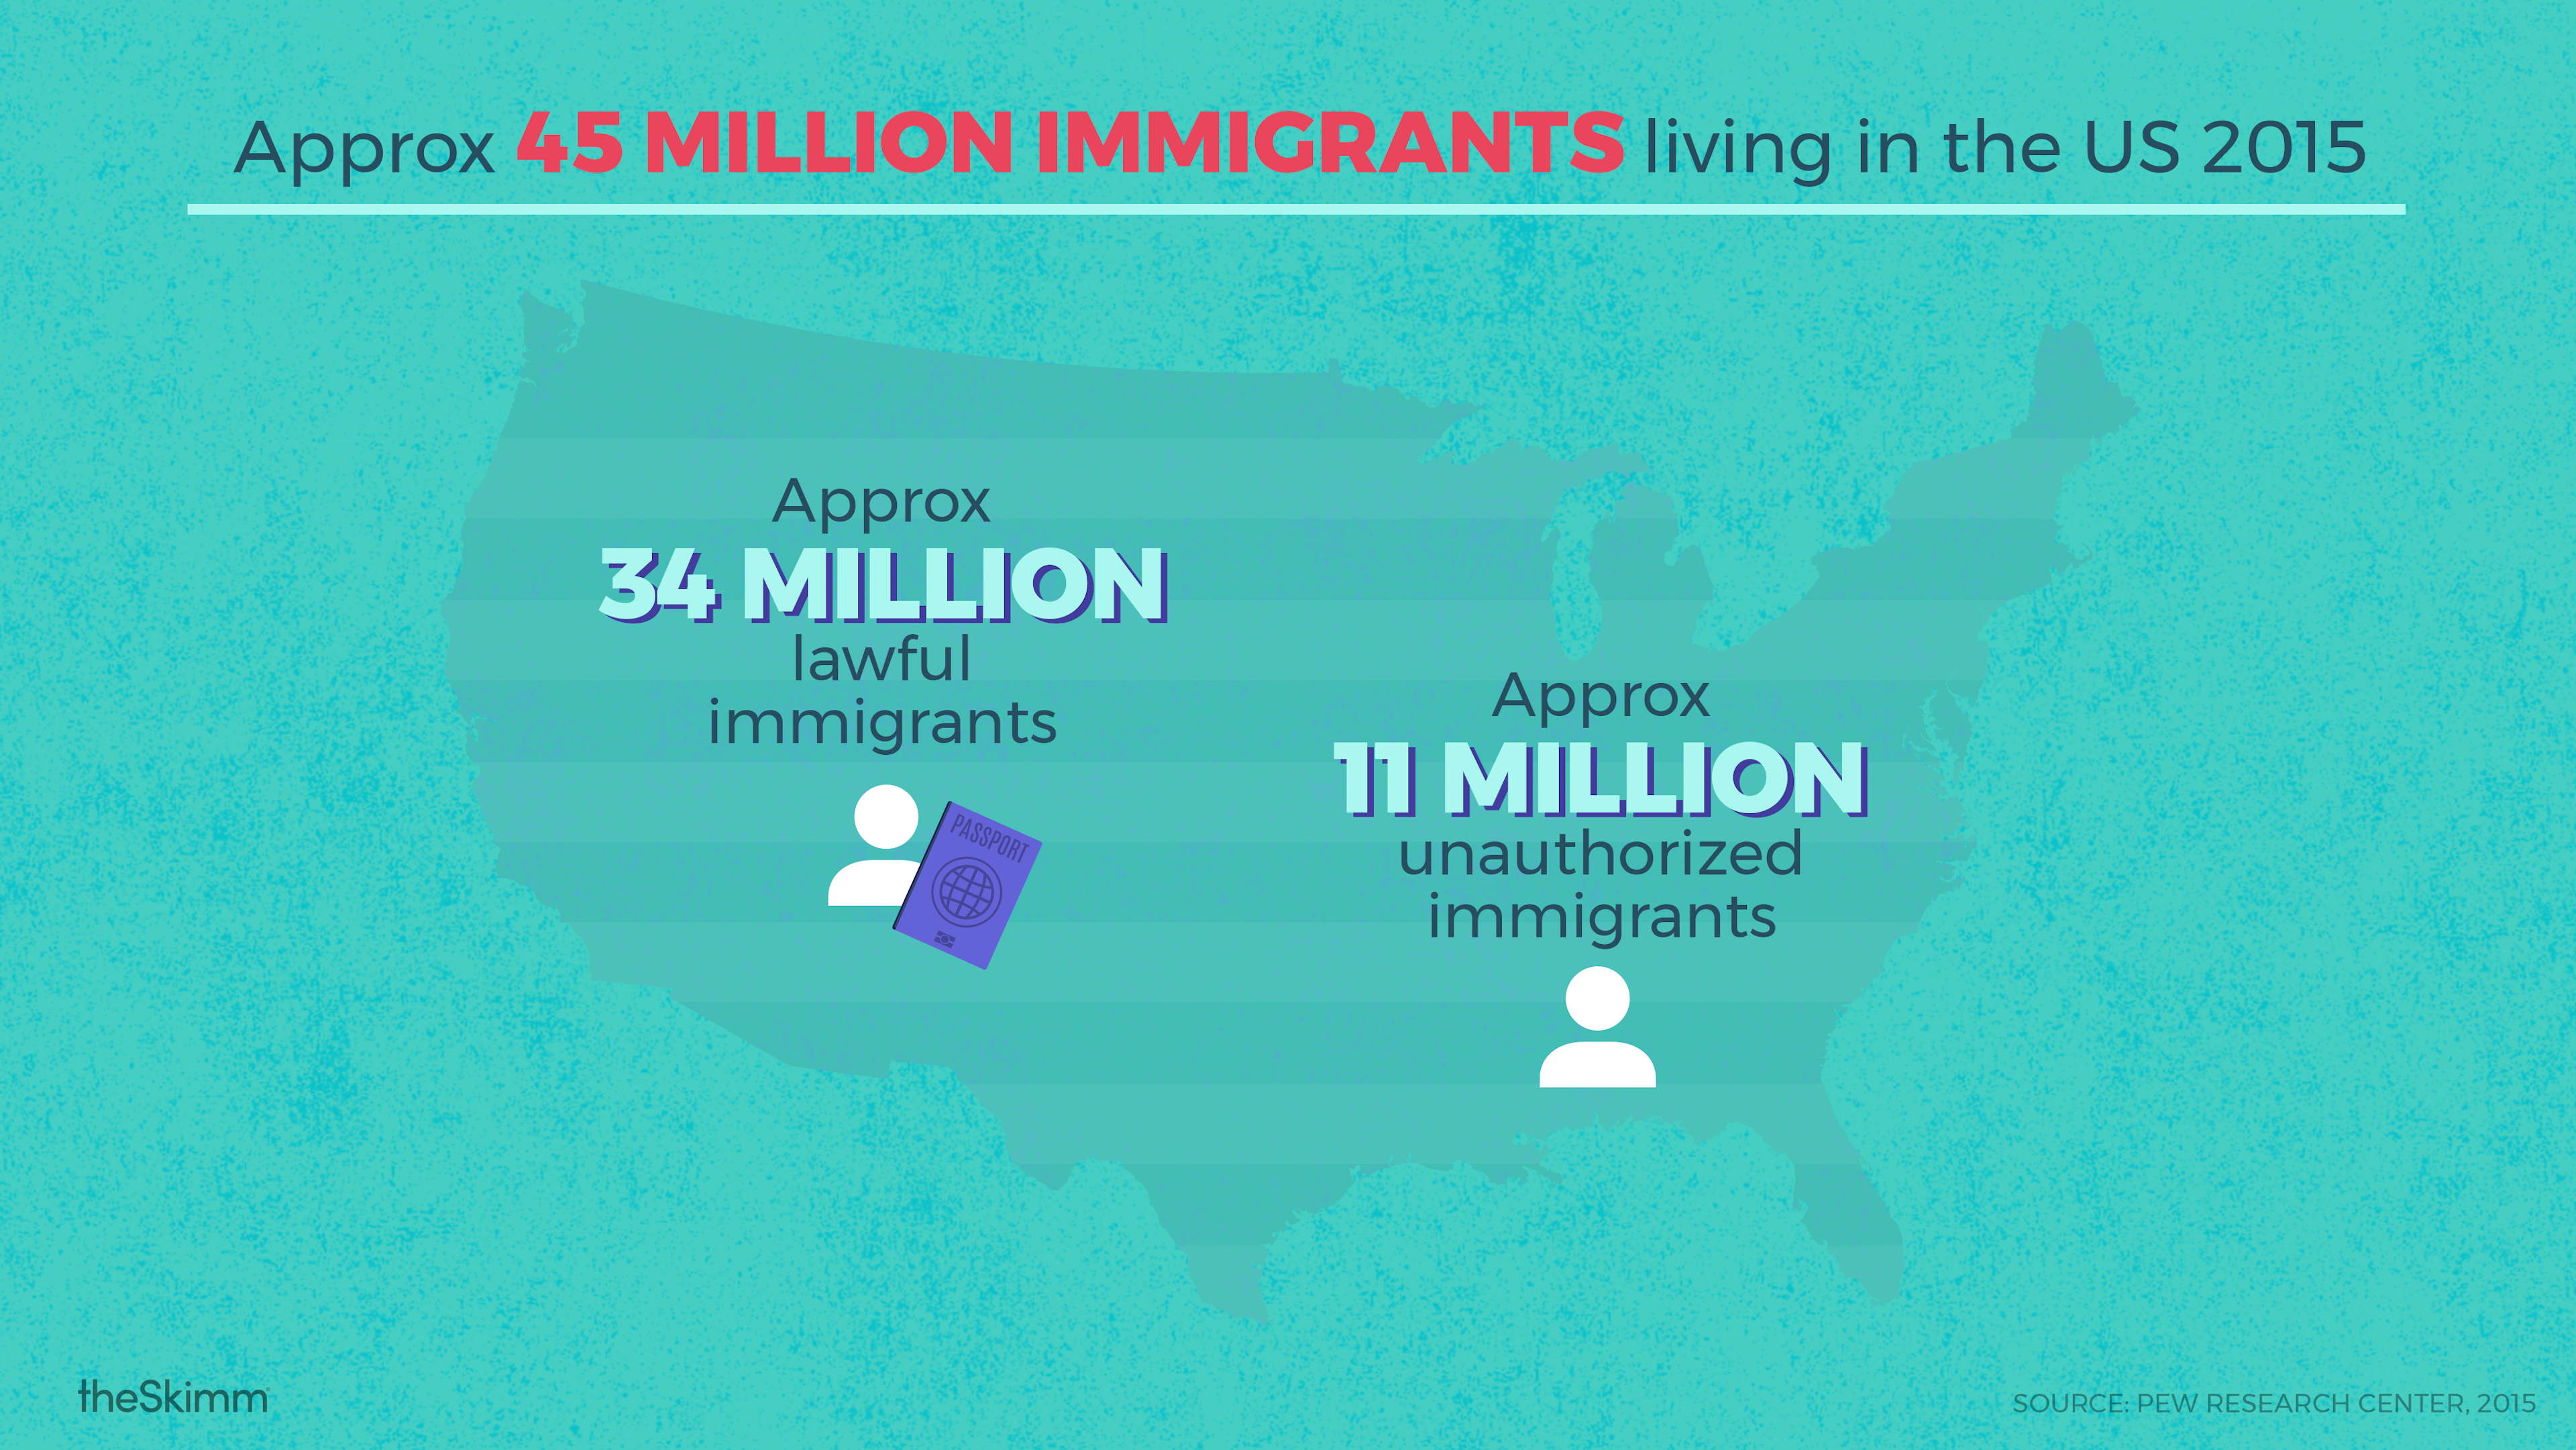 Approximately 45 million immigrants living in the US in 2015: Approximately 34 million lawful immigrants and approximately 11 million unauthorized immigrants